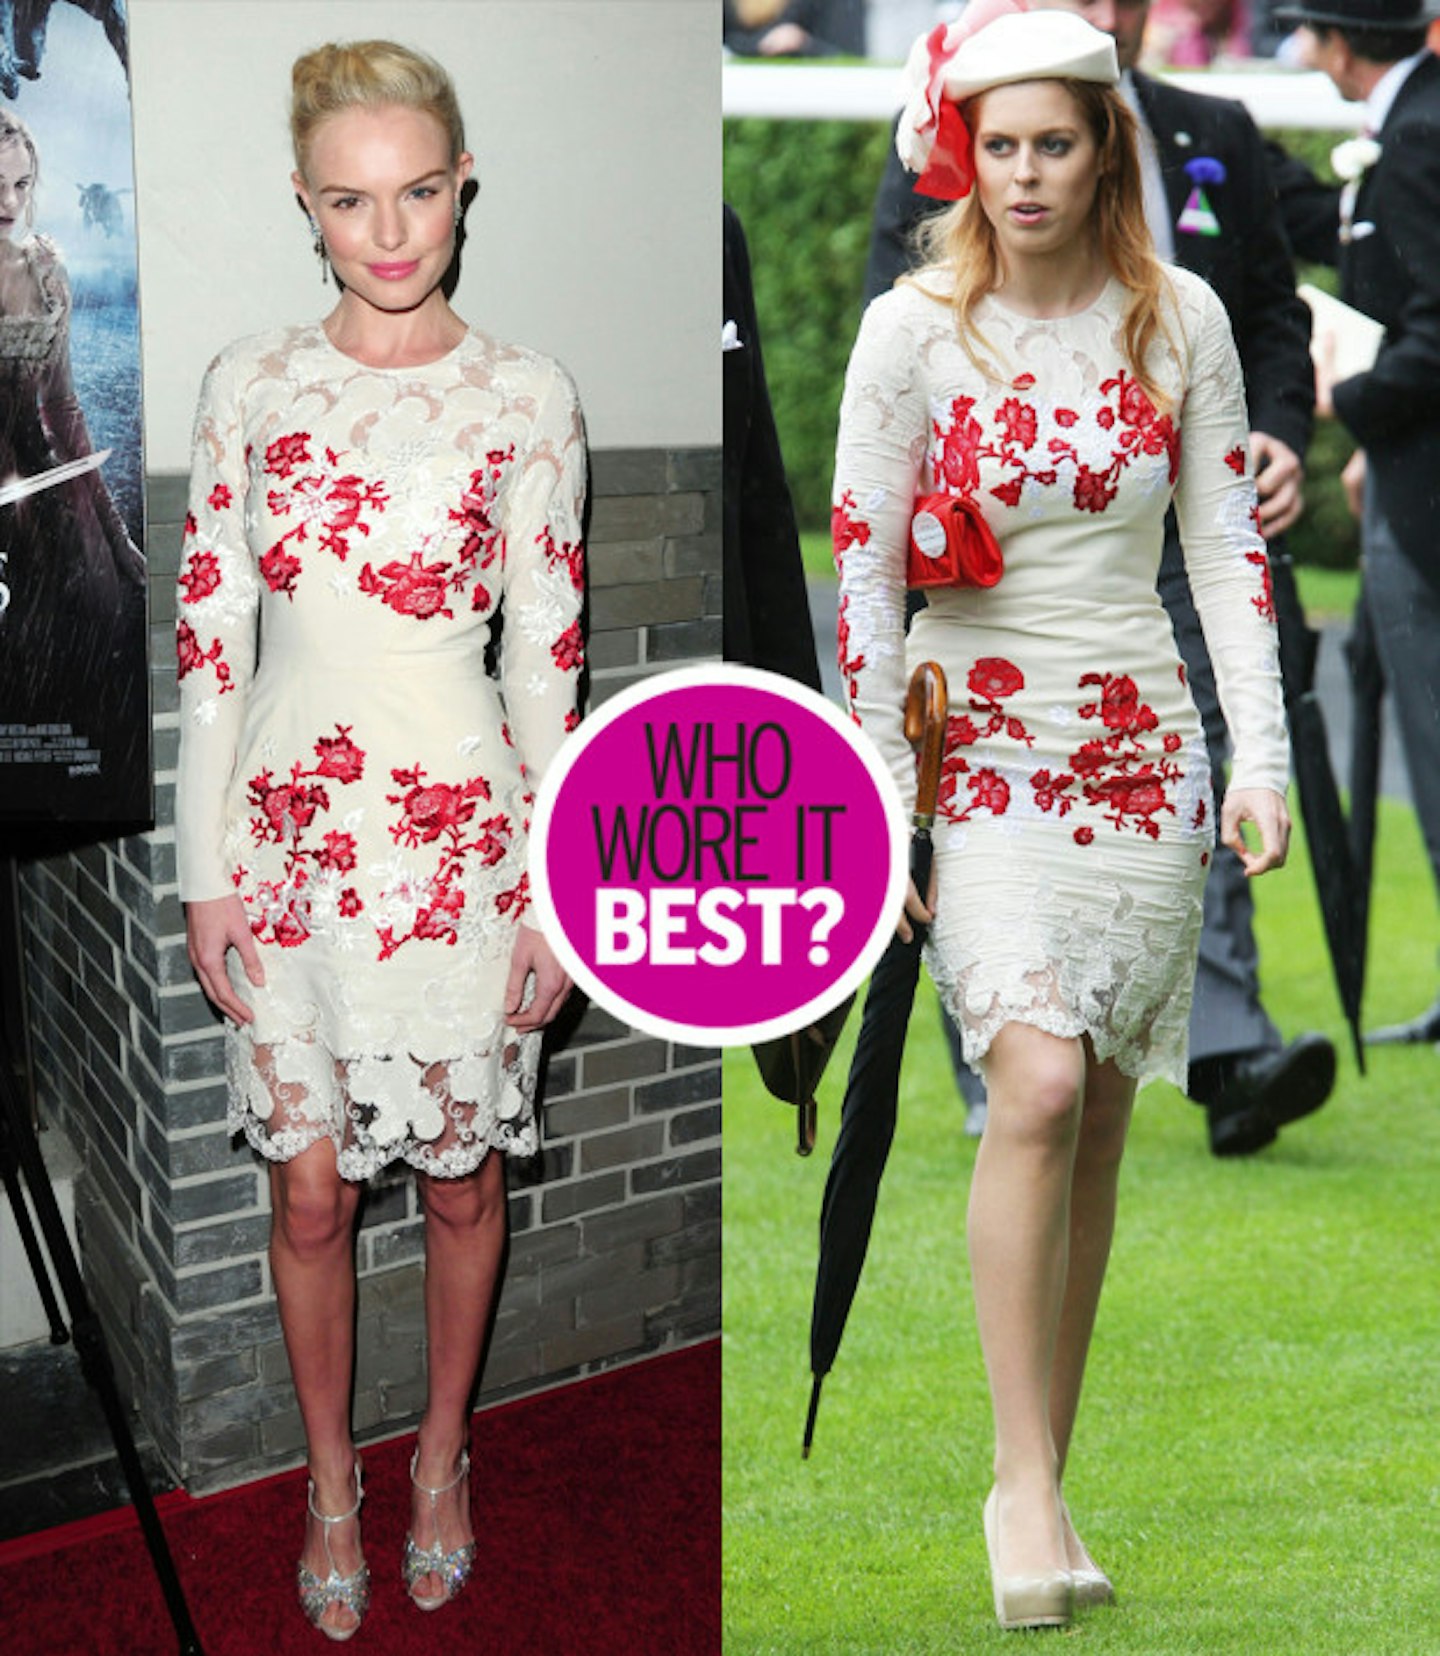 who-wore-it-best-kate-bosworth-princess-beatrice-red-white-lace-floral-dress